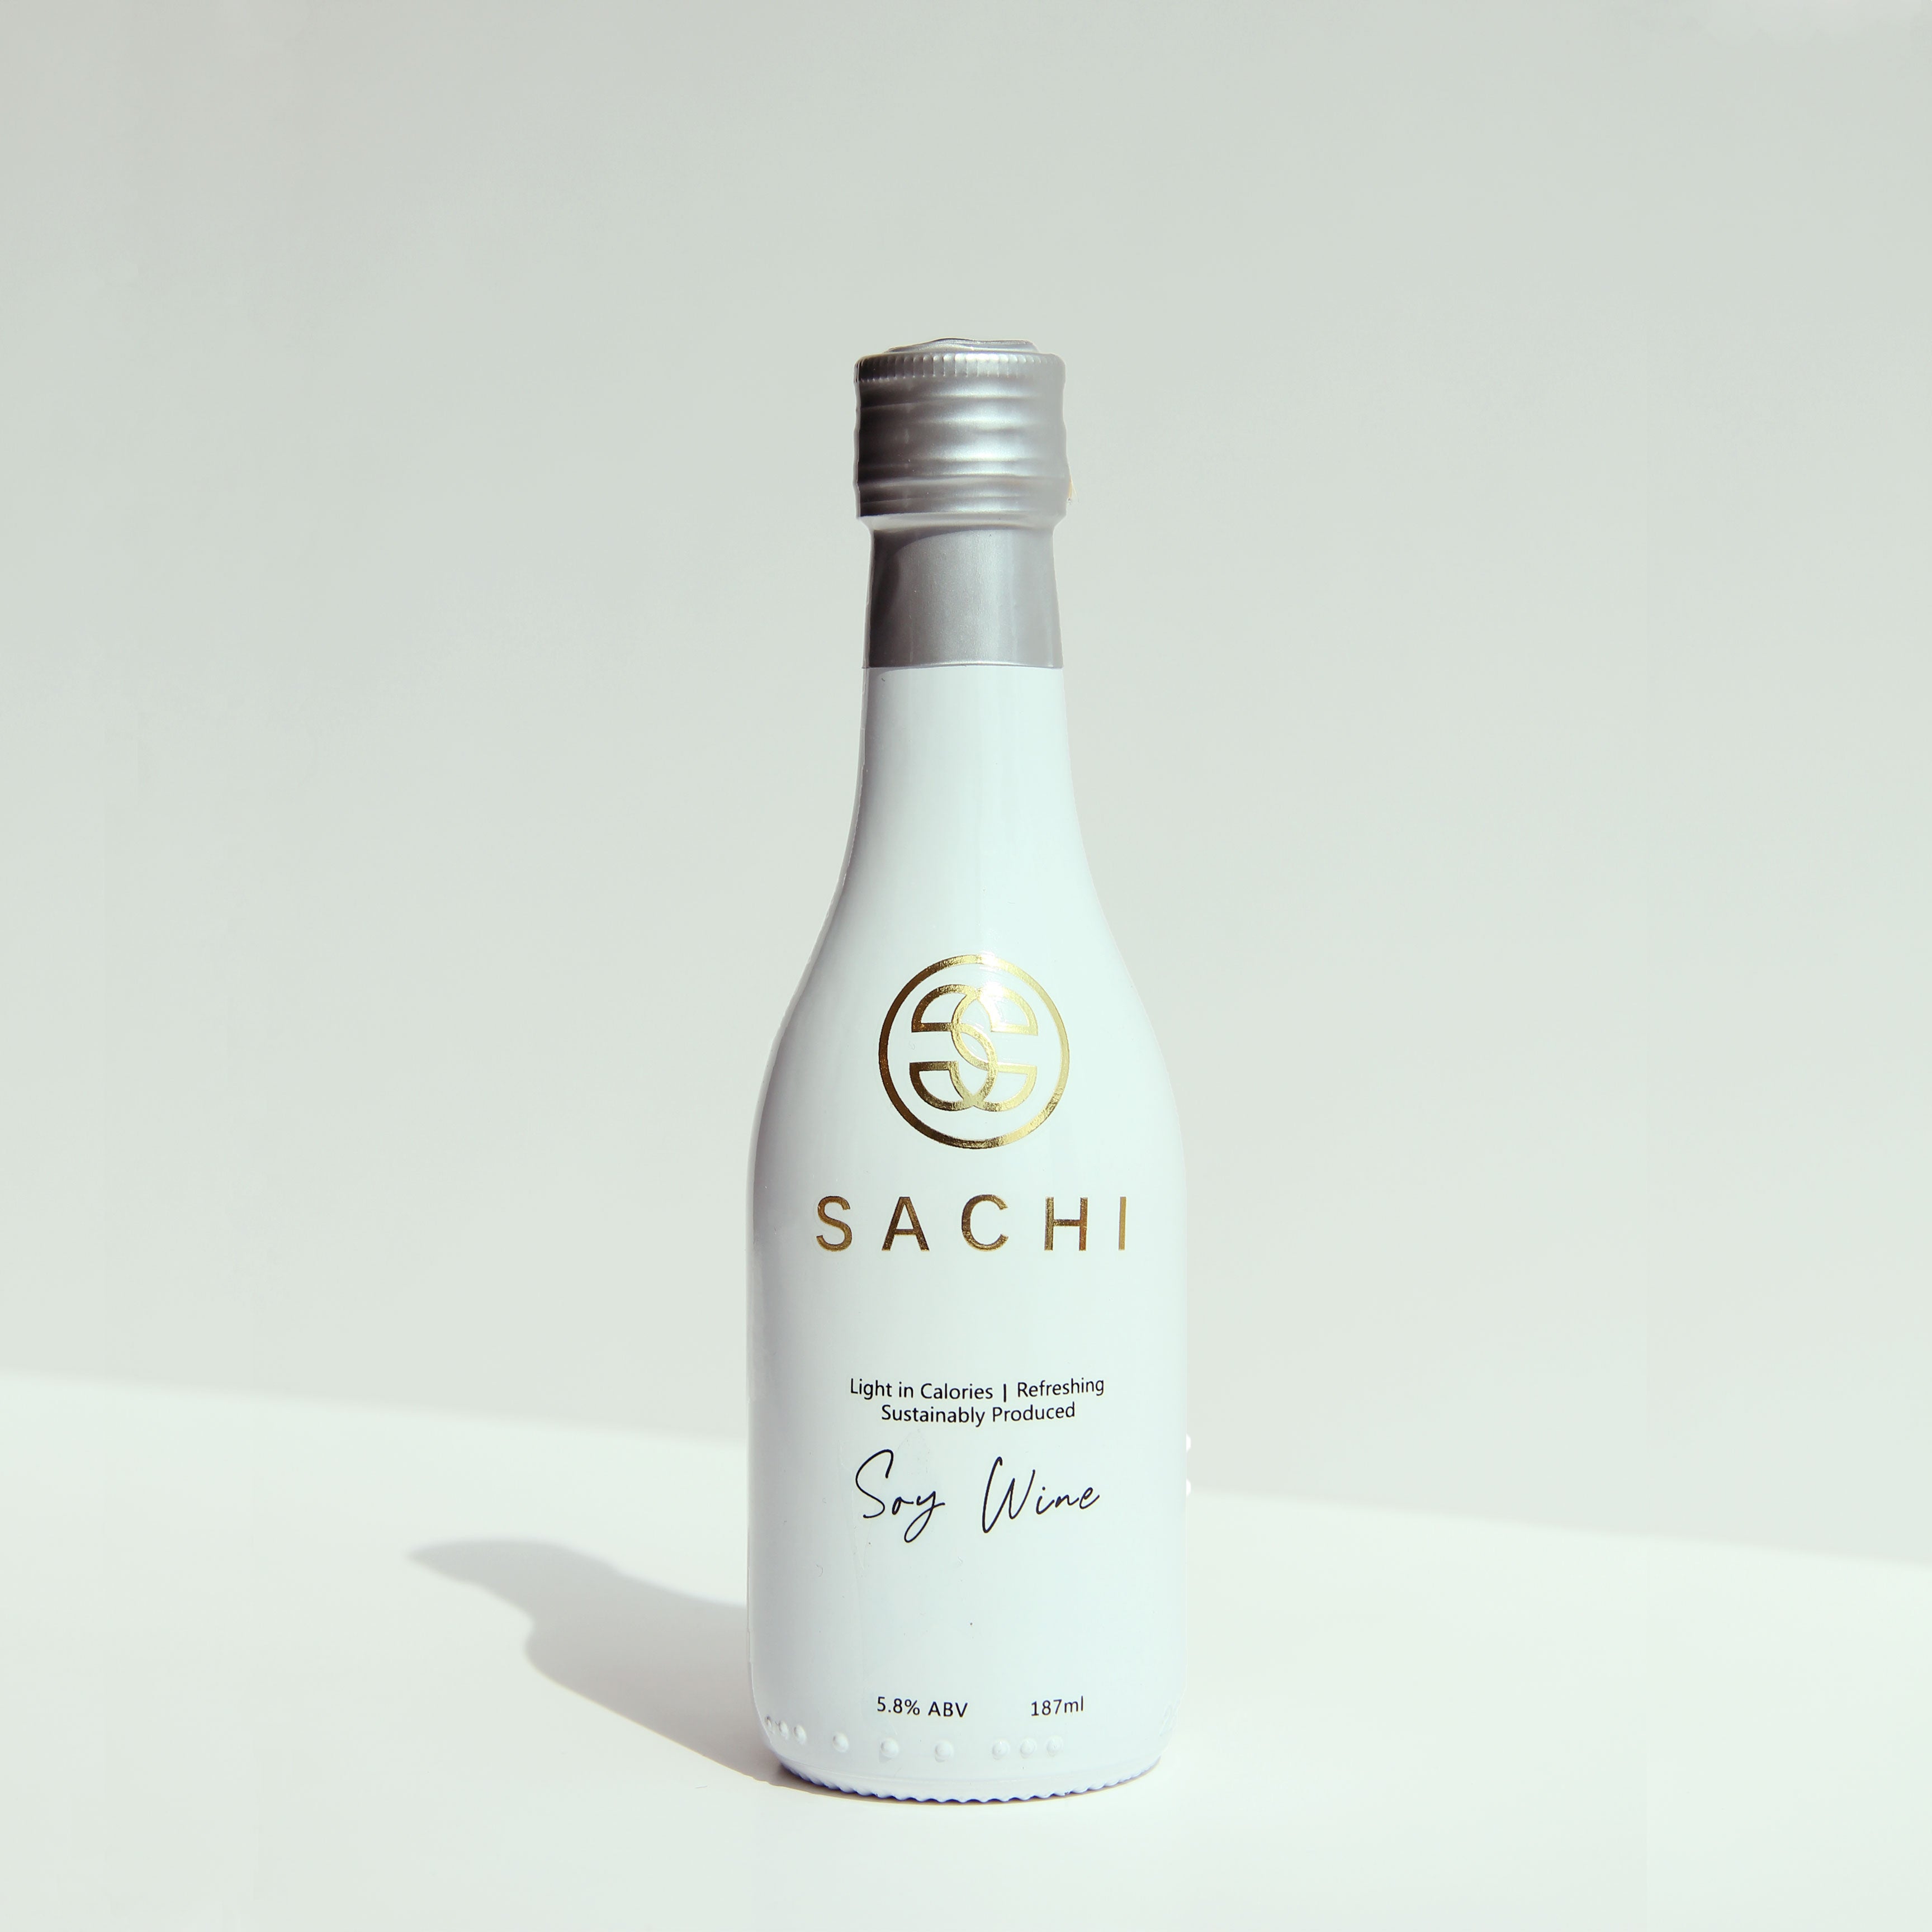 Sinfootech Pte Ltd Sachi Soy Wine | Shop at The Green Collective